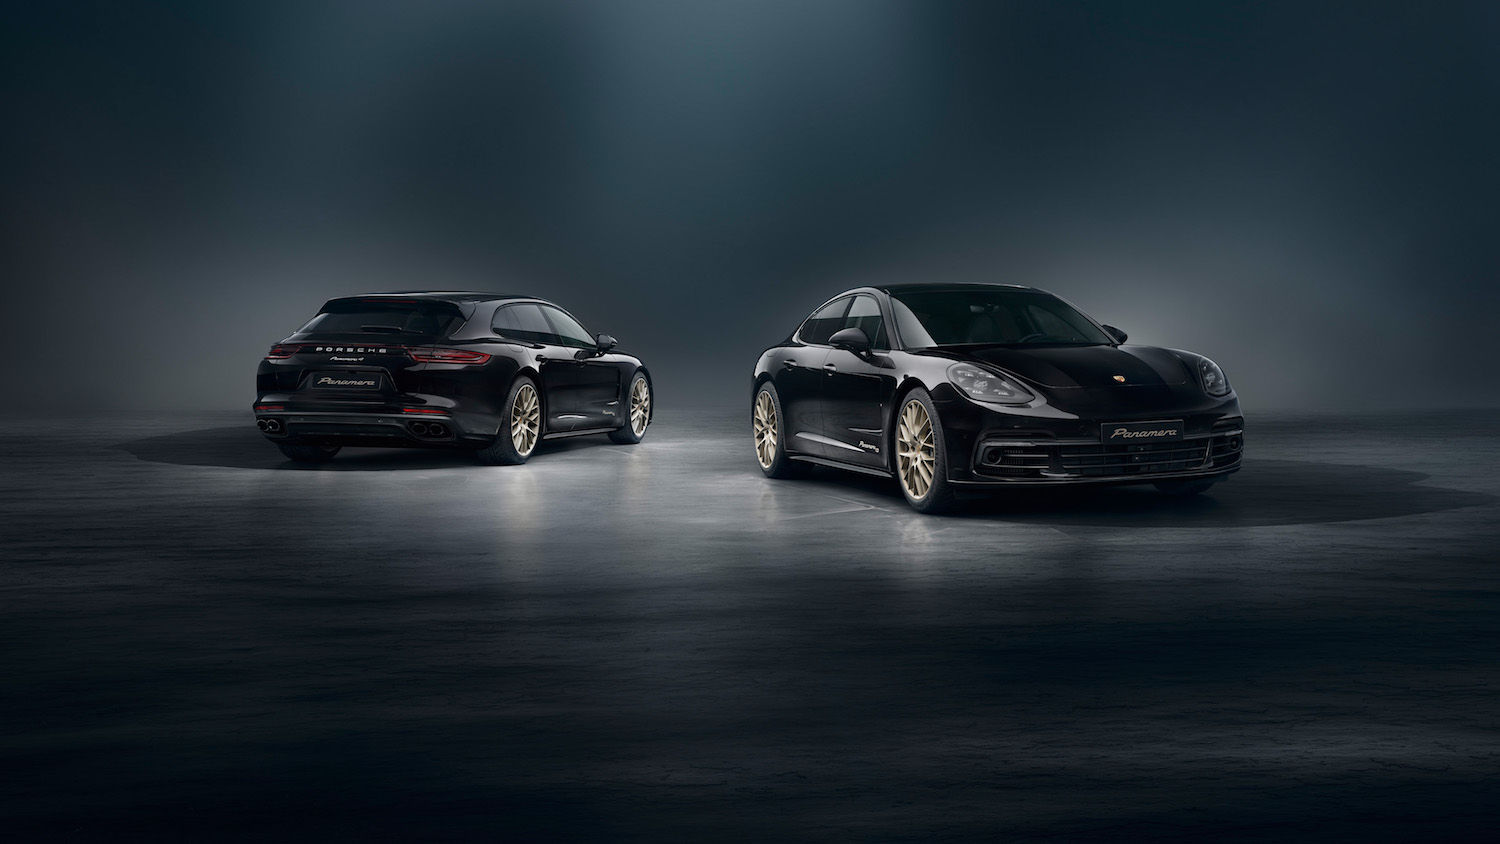 Porsche celebrates 10 years of Panamera with gold-detailed special editions